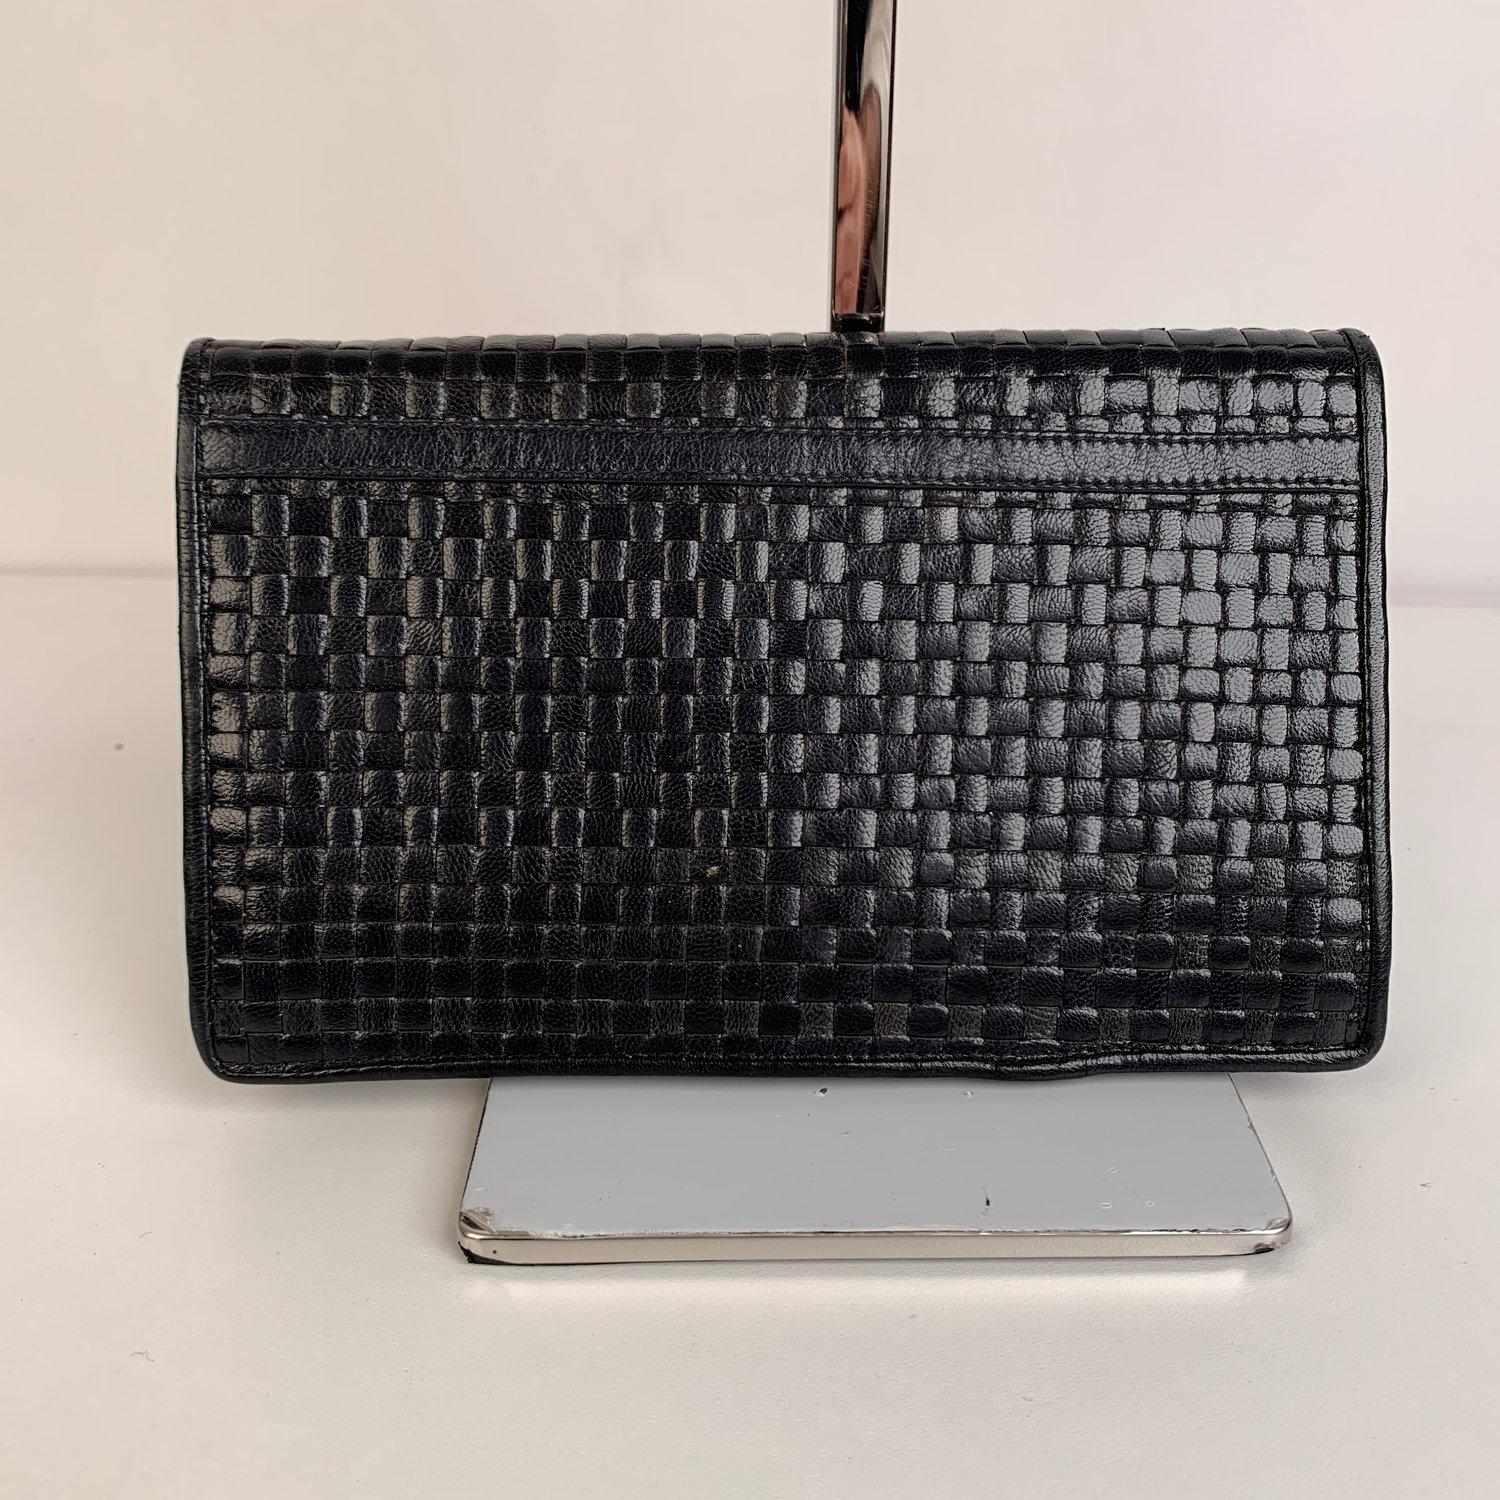 Vintage Fendi clutch crafted in woven leather, dark blue color. Flap with magnetic button closure. FENDI signature engraved on the button. 2 main compartments inside and 1 side zip pocket. Details MATERIAL: Leather COLOR: Blue MODEL: Clutch GENDER: